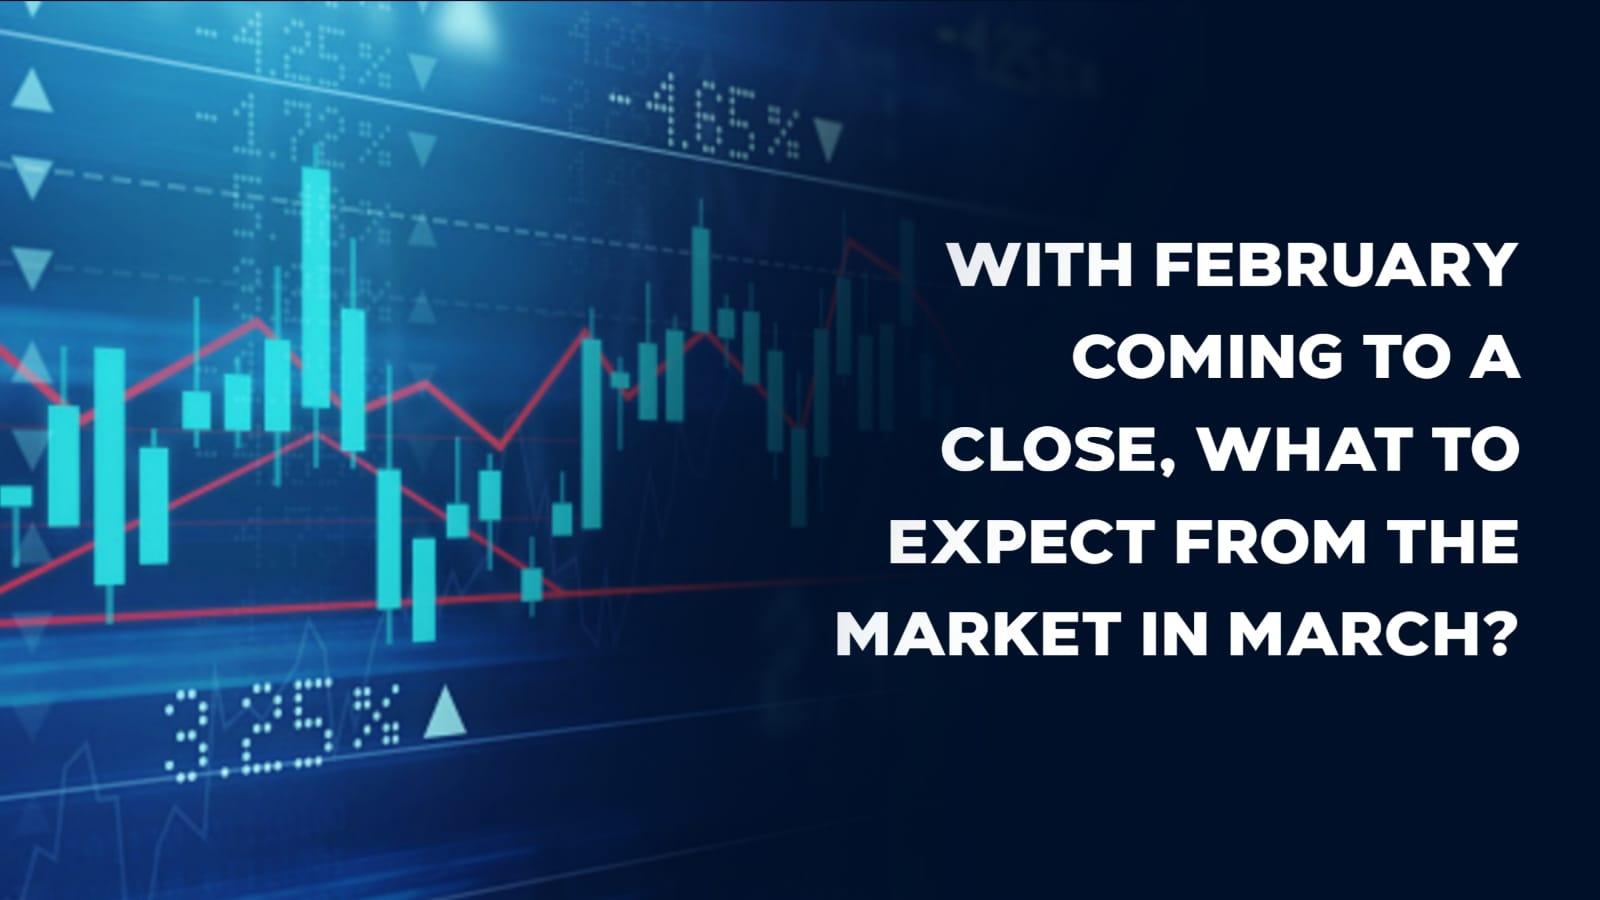 With February Coming To A Close, What To Expect From The Market In March?